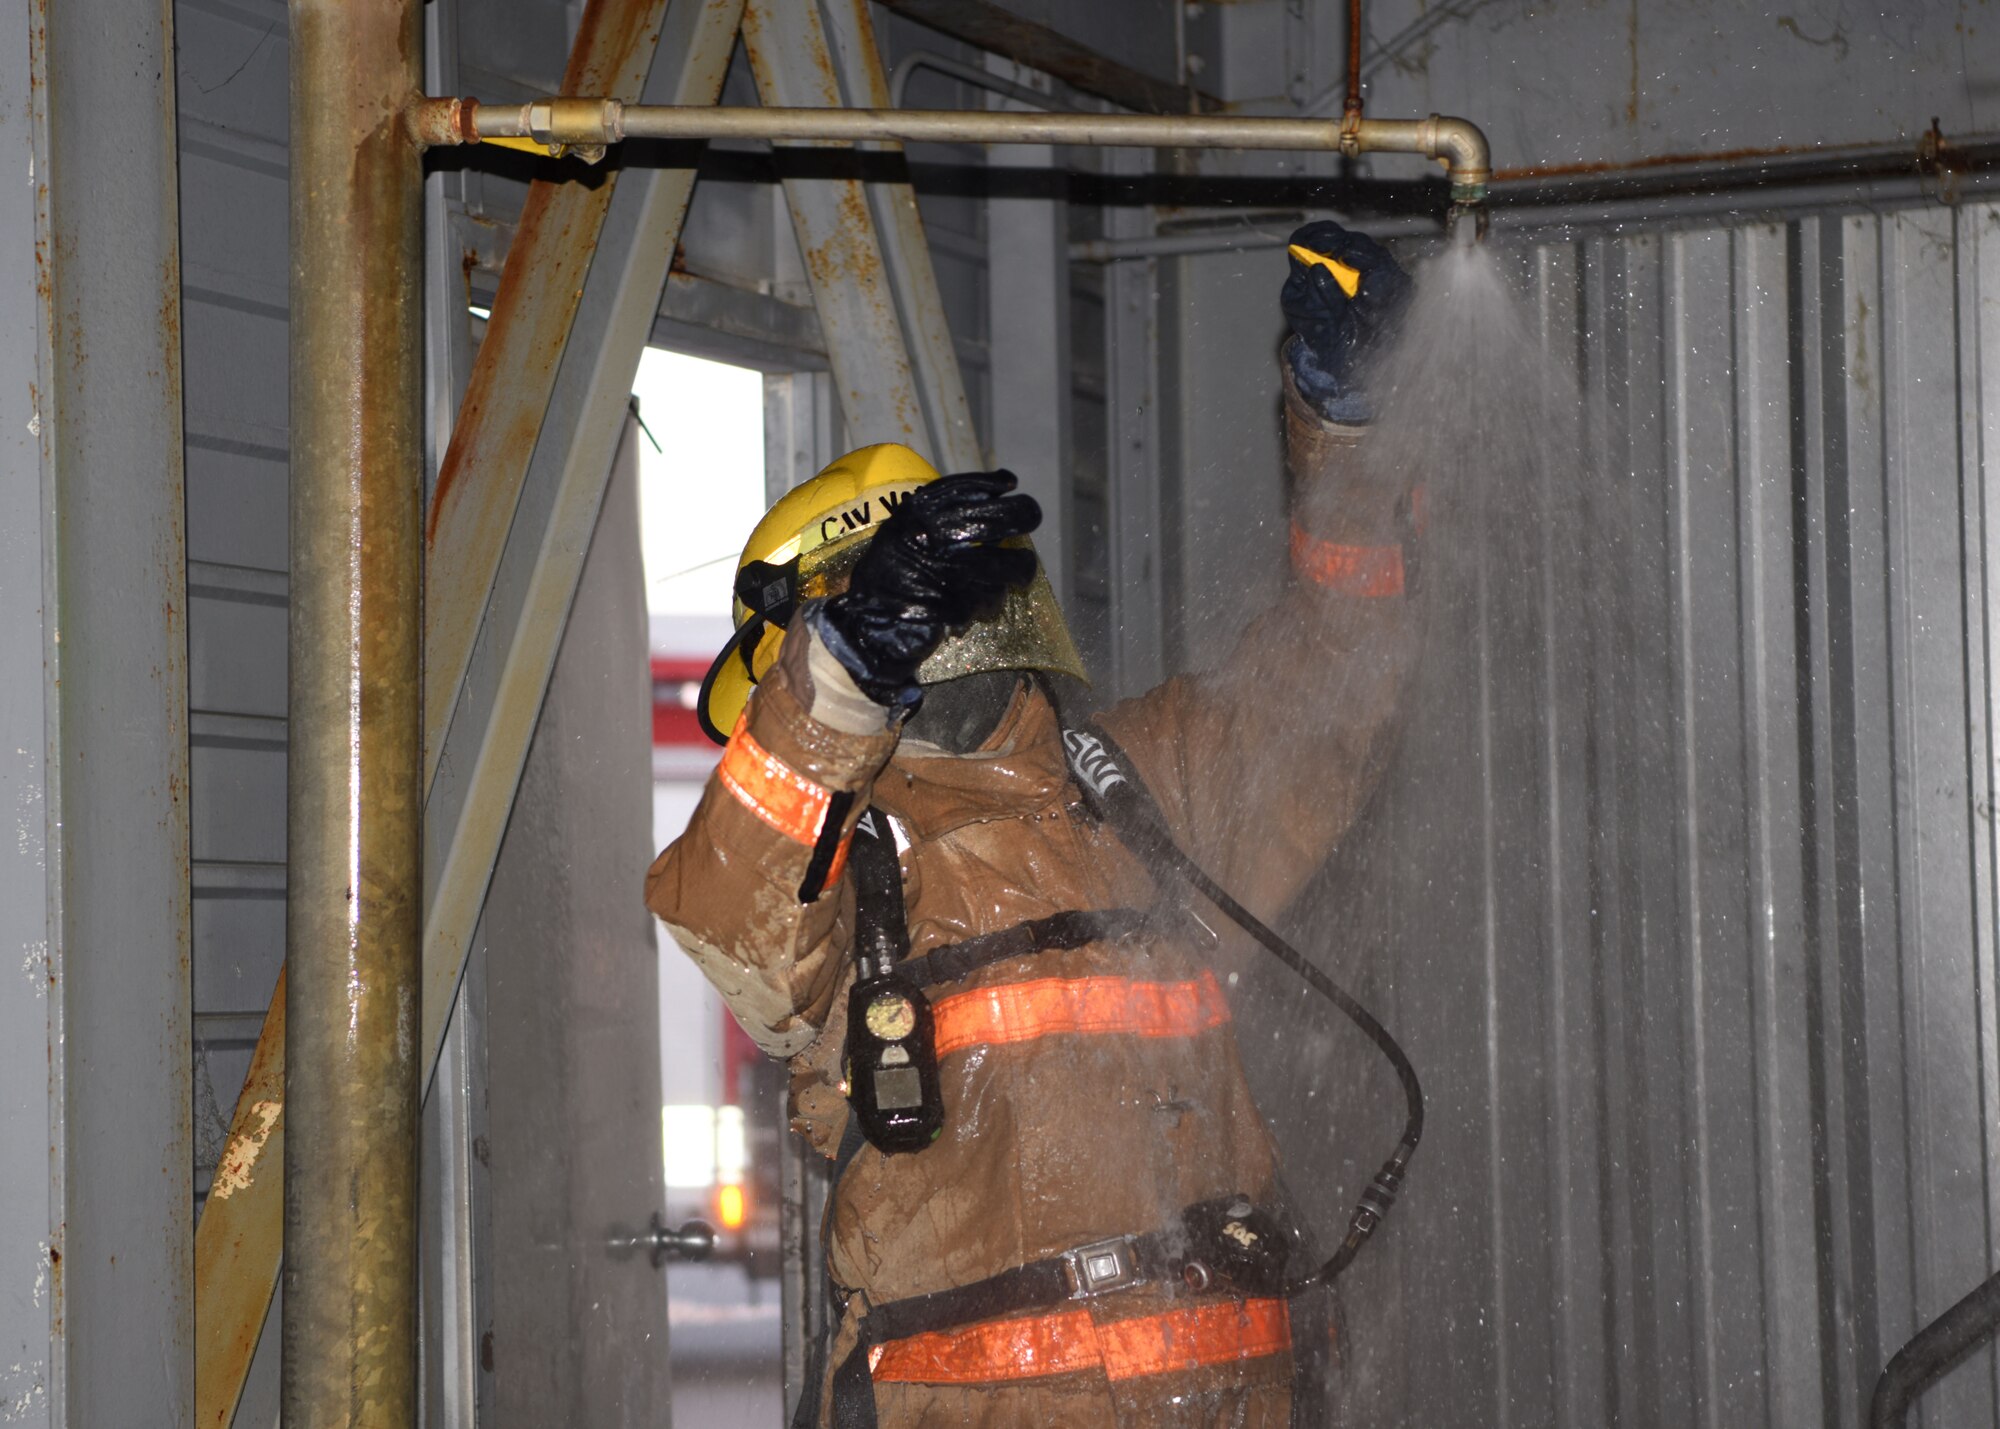 A 312th Training Squadron student responds to a call about a leak during the final exercise of Block III at the Louis F. Garland Department of Defense Fire Academy on Goodfellow Air Force Base, Texas, May 6, 2020. Firefighters were trained for much more than just responding to fires, they also handle leaks, structural damage, rescue, and other crises. (U.S. Air Force photo by Airman 1st Class Ethan Sherwood)